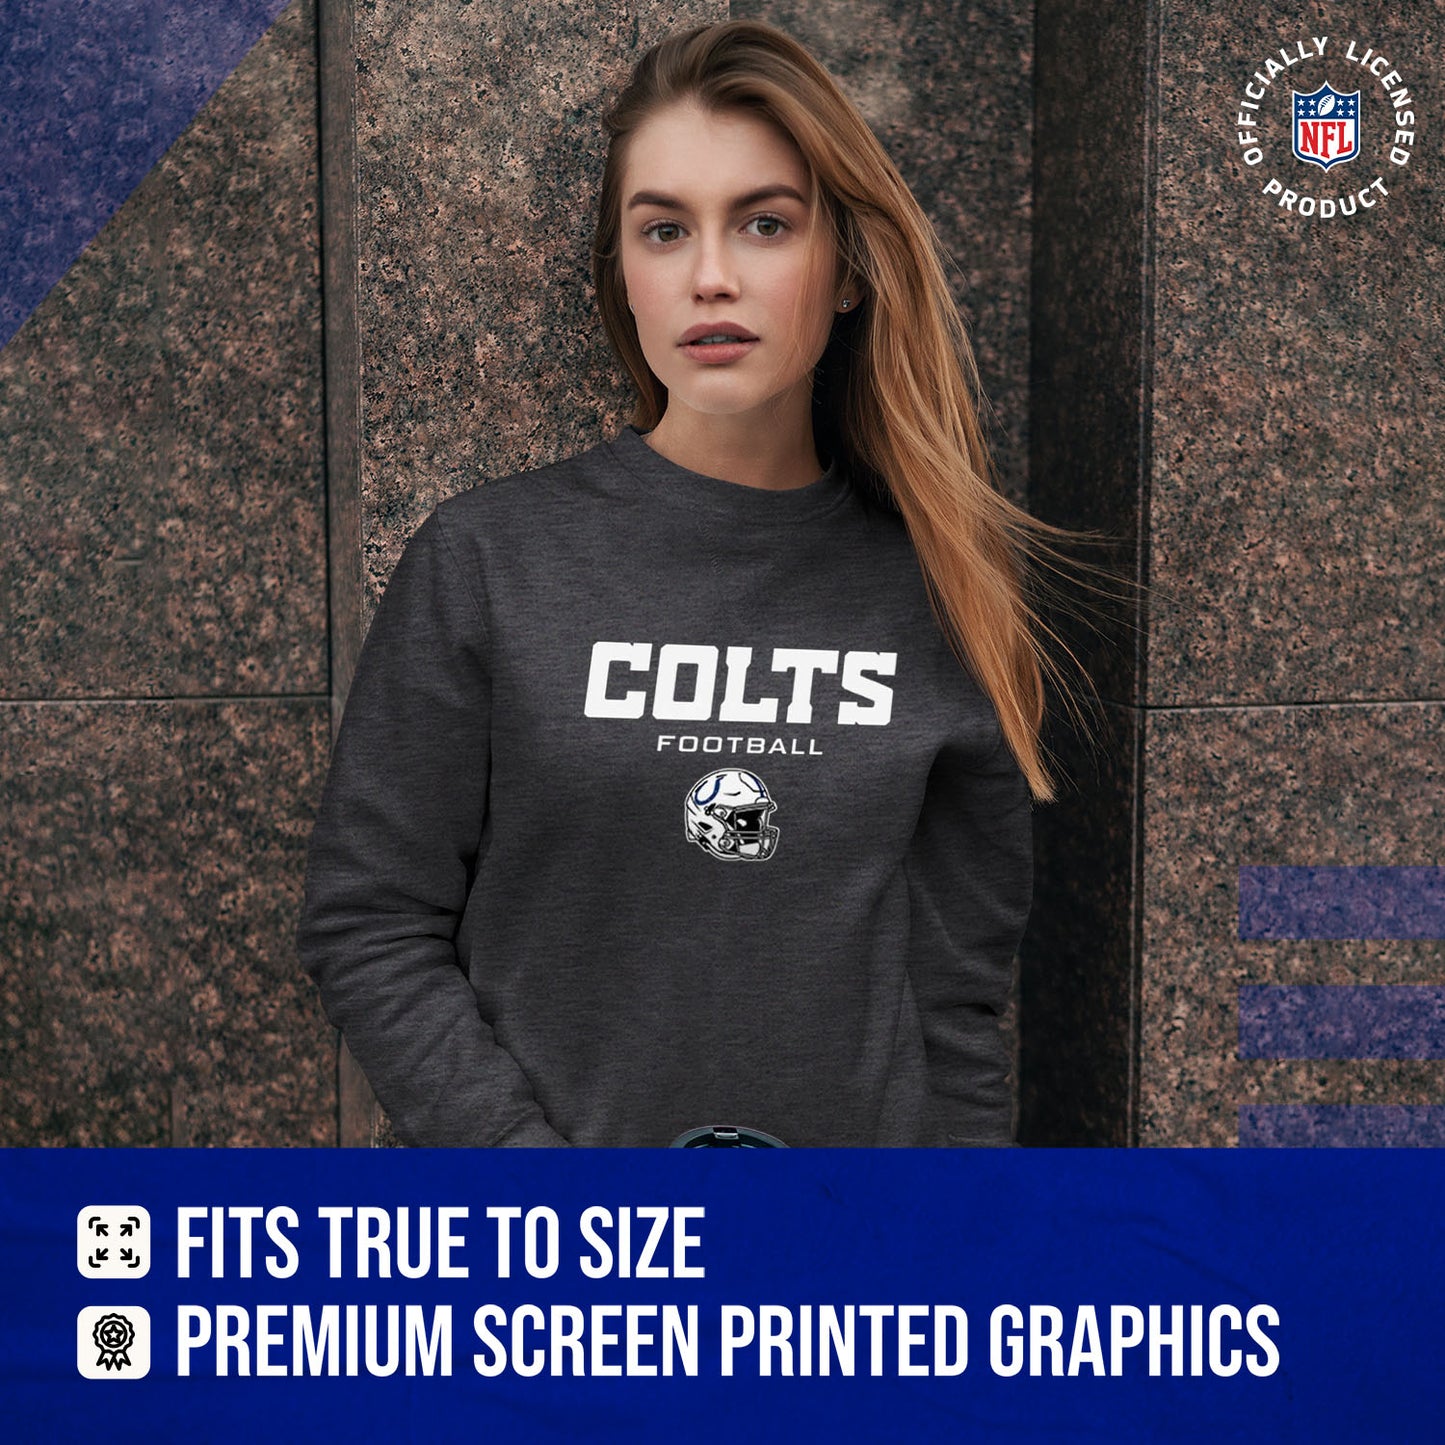 Indianapolis Colts Women's NFL Football Helmet Charcoal Slouchy Crewneck -Tagless Lightweight Pullover - Charcoal